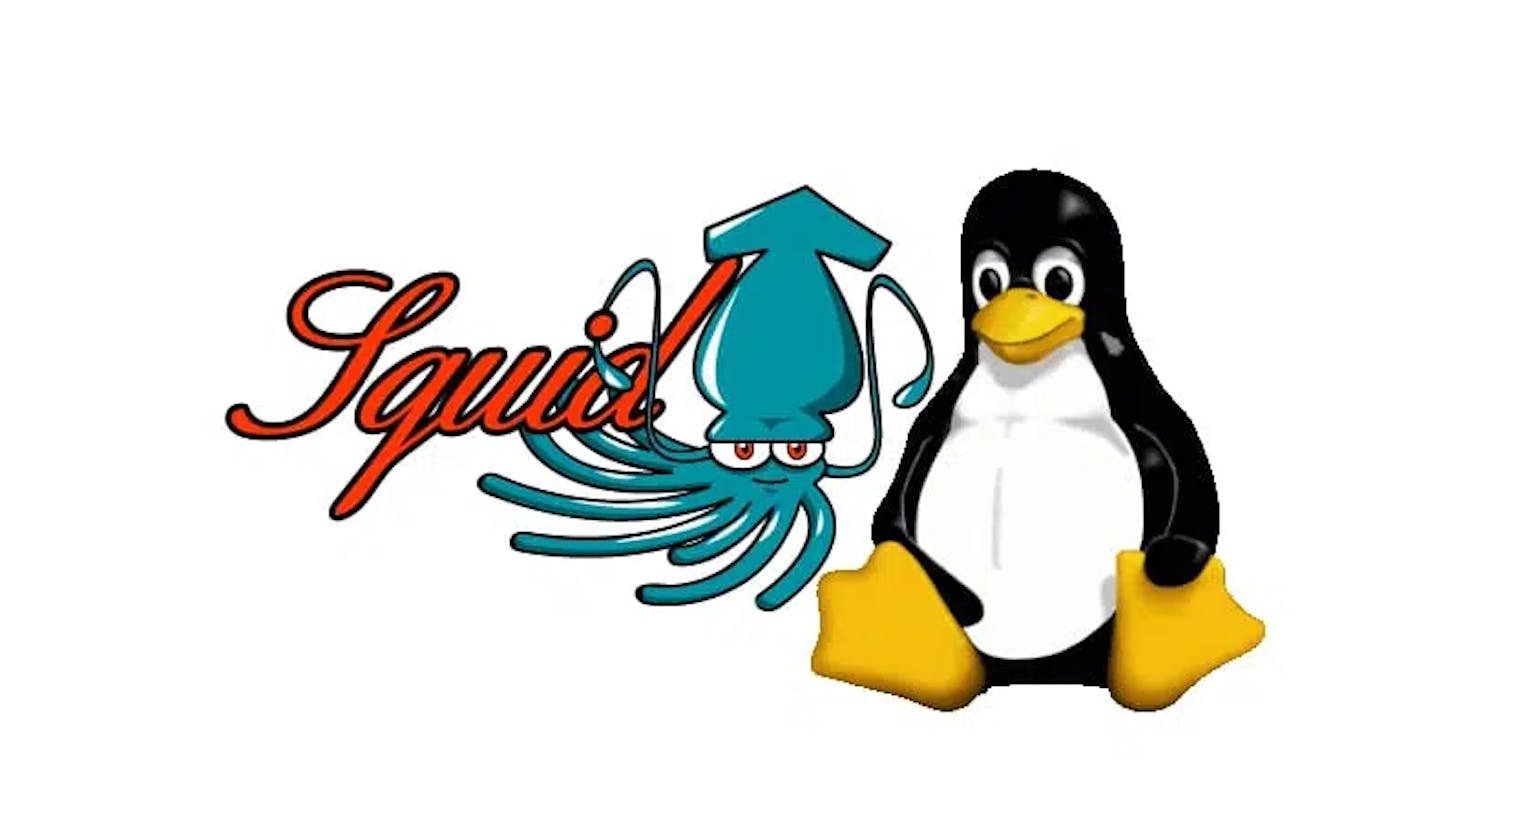 How To Install And Config Squid On Rhel/ Centos